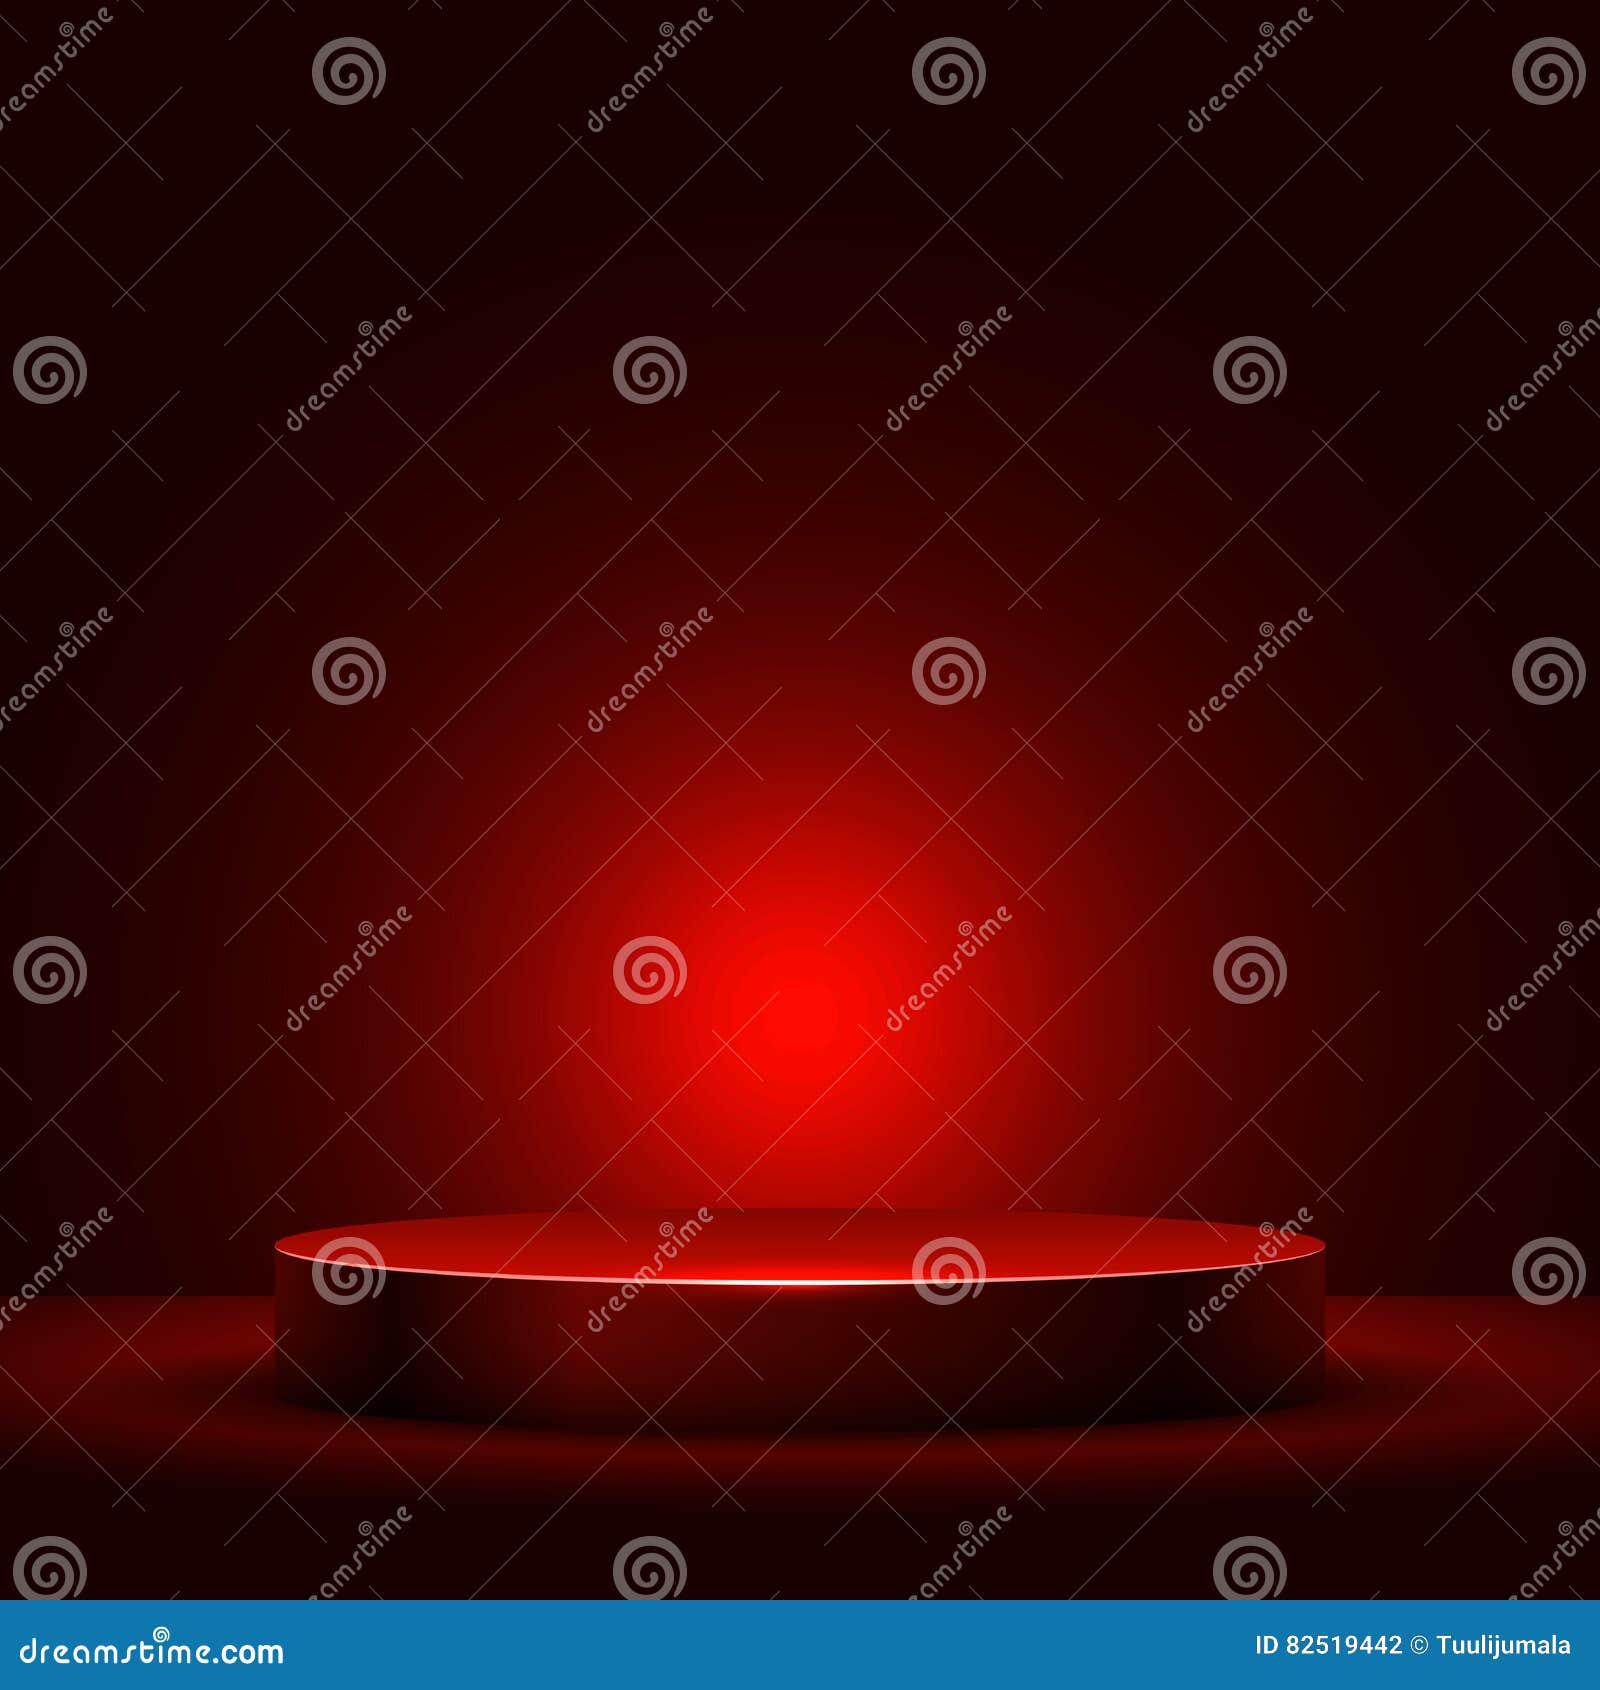 abstract round podium with red light